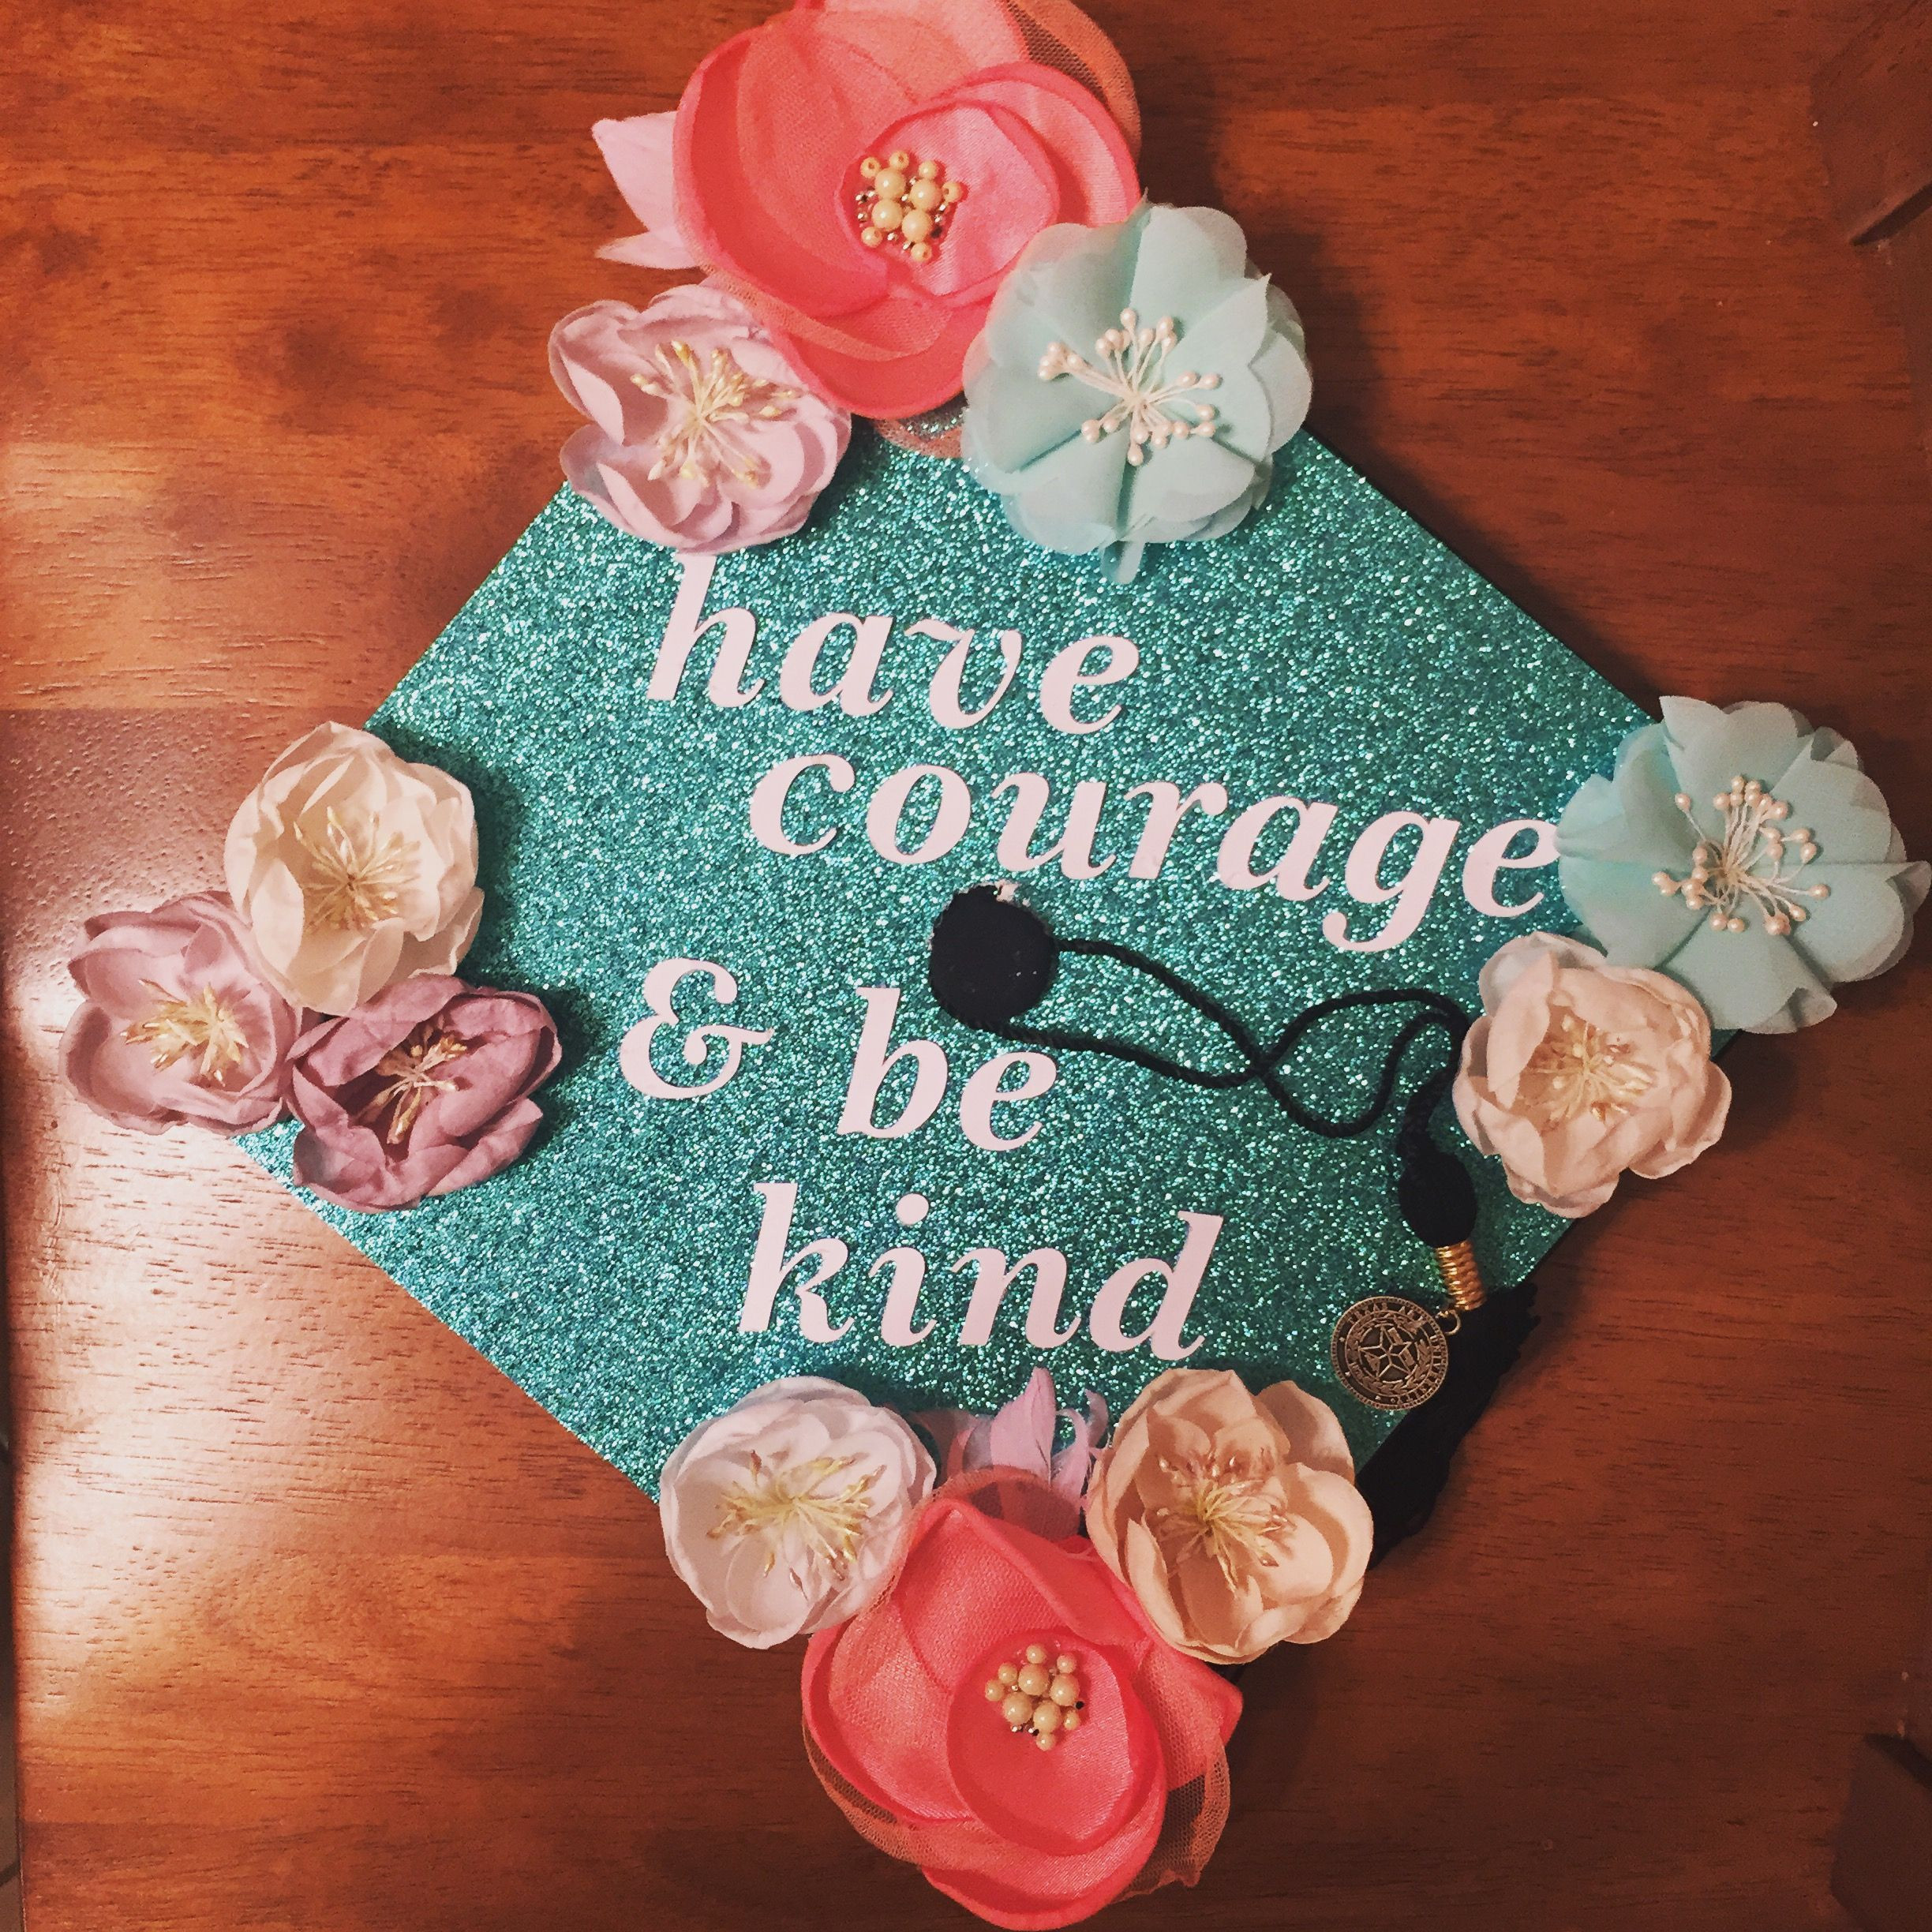 Graduation Quotes From Movies
 Floral graduation cap with a quote from the new Cinderella